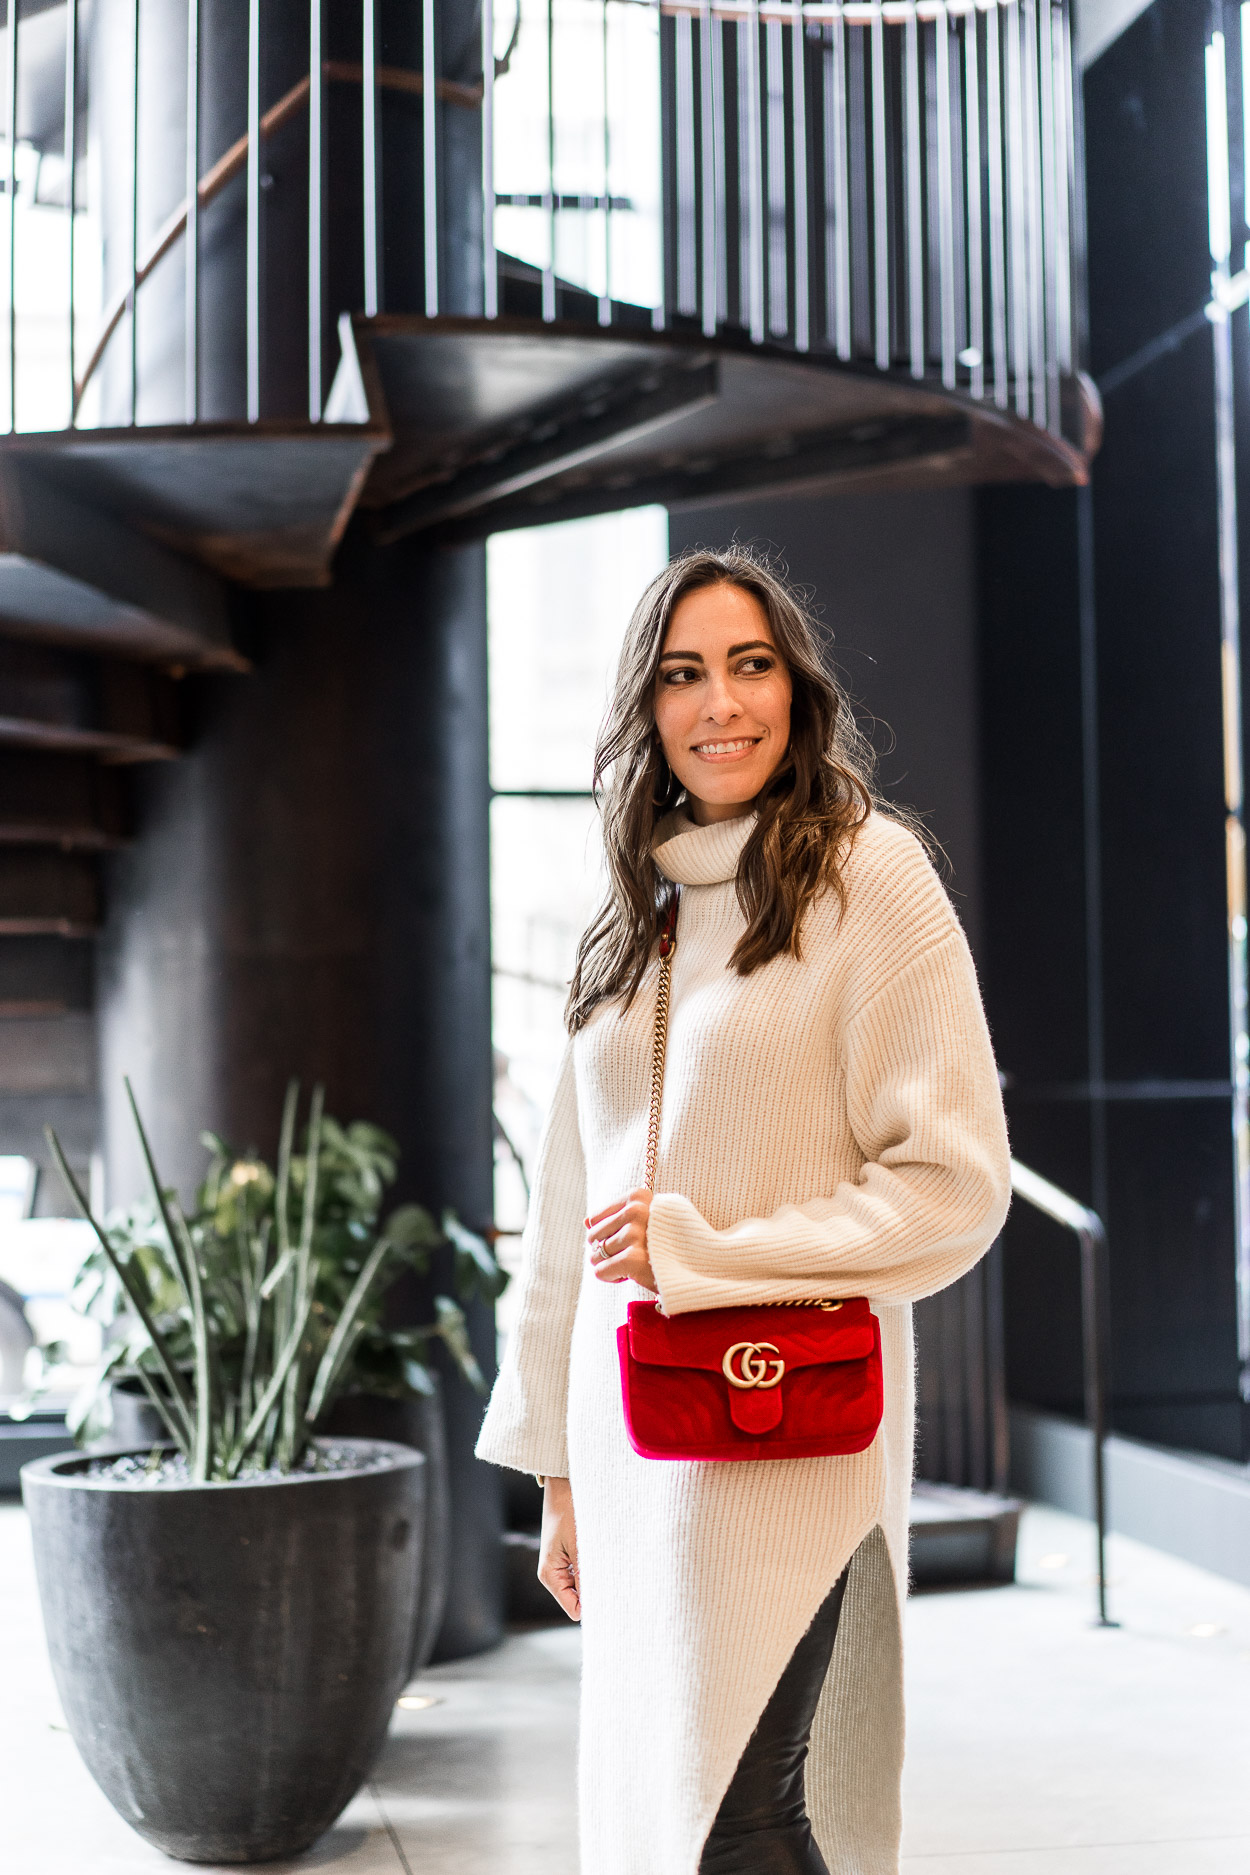 bianca_petry styled with the @gucci marmont velvet bag in red Hire